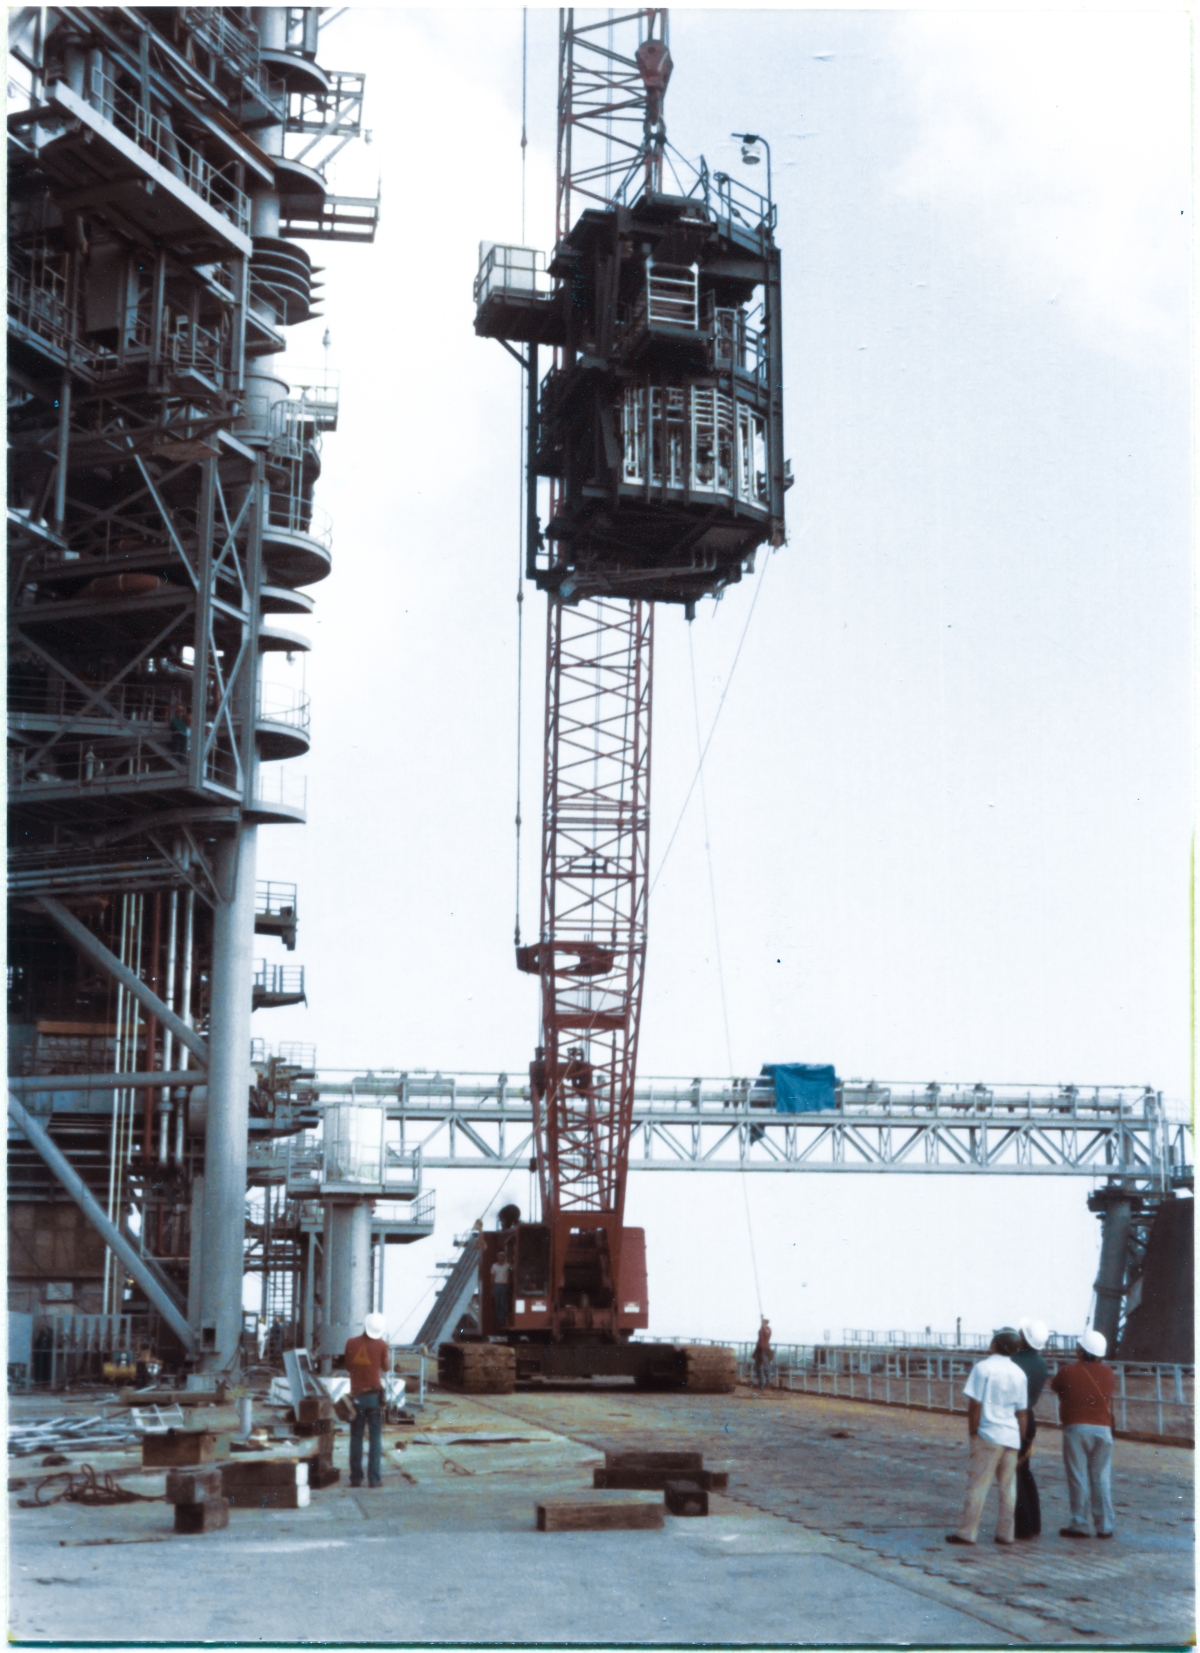 Image 091. Higher and higher into the air it goes. By this point in the OMBUU Lift at Space Shuttle Launch Complex 39-B, Kennedy Space Center, Florida, all of Ivey's Union Ironworkers involved with the lift and subsequent connection of the OMBUU to the face of the RSS had departed the Pad Deck, with the sole exception of the two who are working the tag lines. At this stage of things, I had moved closer to the lift with my camera, and also closer to the RSS, working to get a good angle on things, looking more directly upward at the OMBUU and also a bit east of due north. On the Pad Deck, Howard Baxter, recognizable by his red shirt and his build, stands with a small group of his TT&V people, watching the lift. In the distance, if you look close, you can see that Wade Ivey has climbed up on the crane, and is standing right next to the crane operator, eyeing things closely, staying right on top of things as they unfold. Photo by James MacLaren.